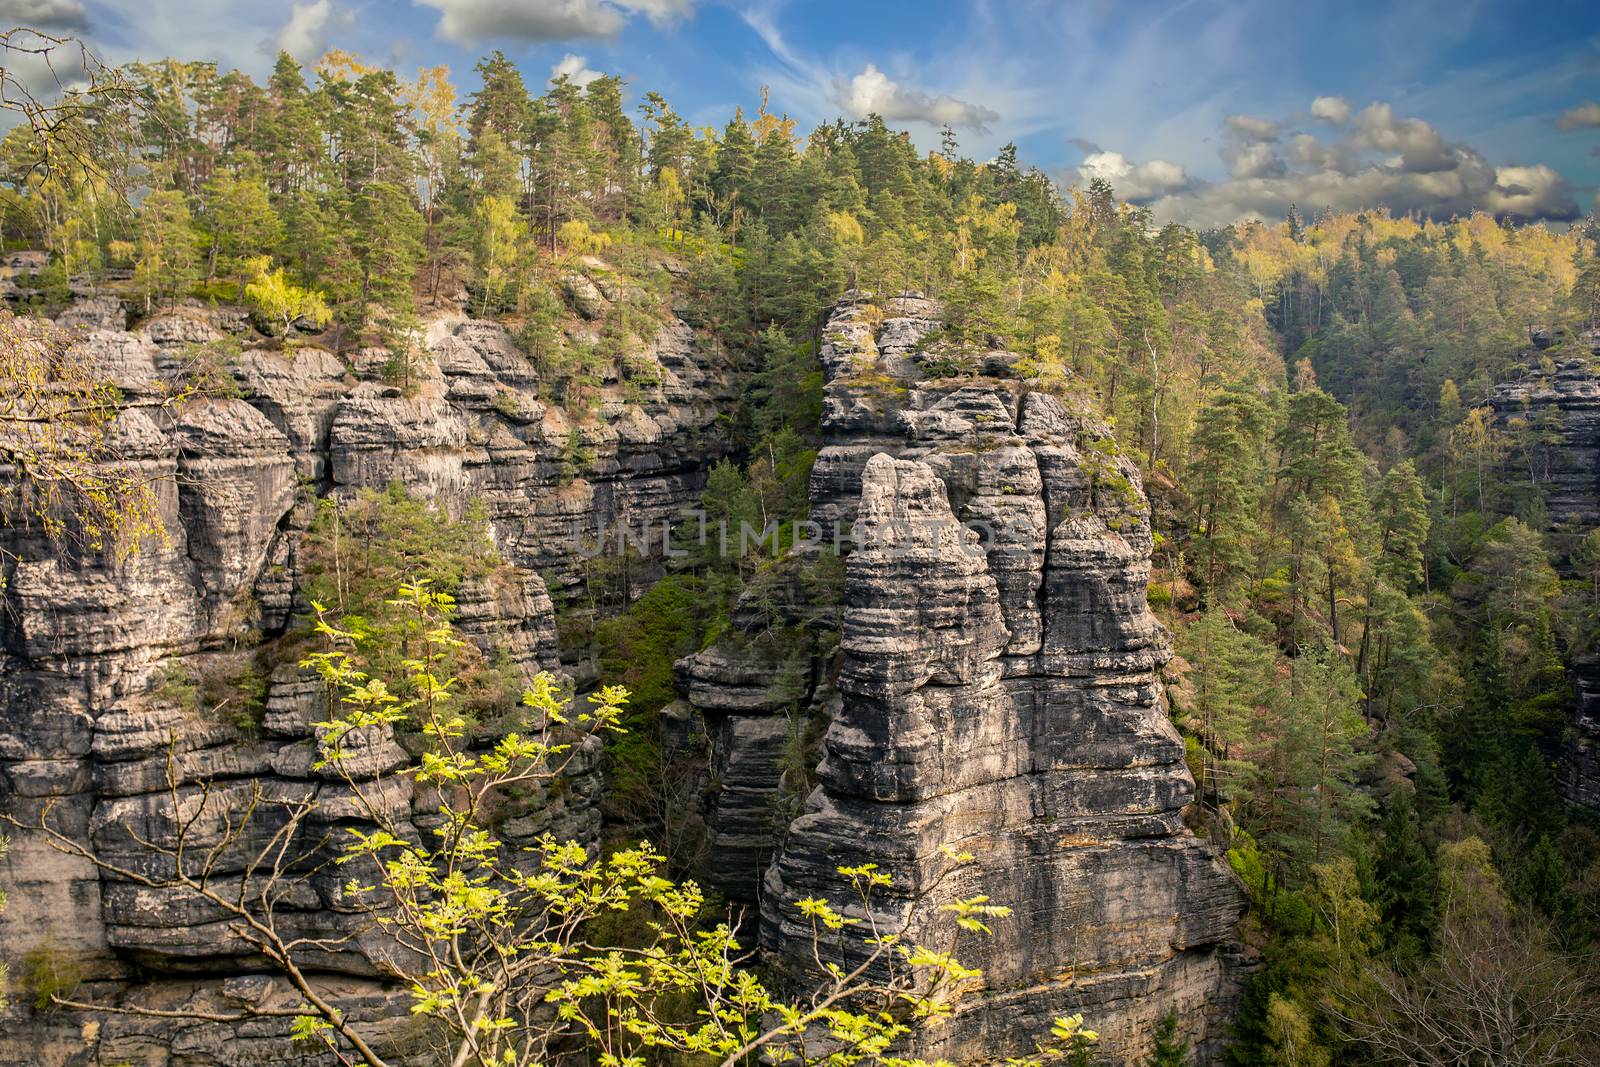 The Elbe Sandstone Mountains are a sandstone massif by 977_ReX_977